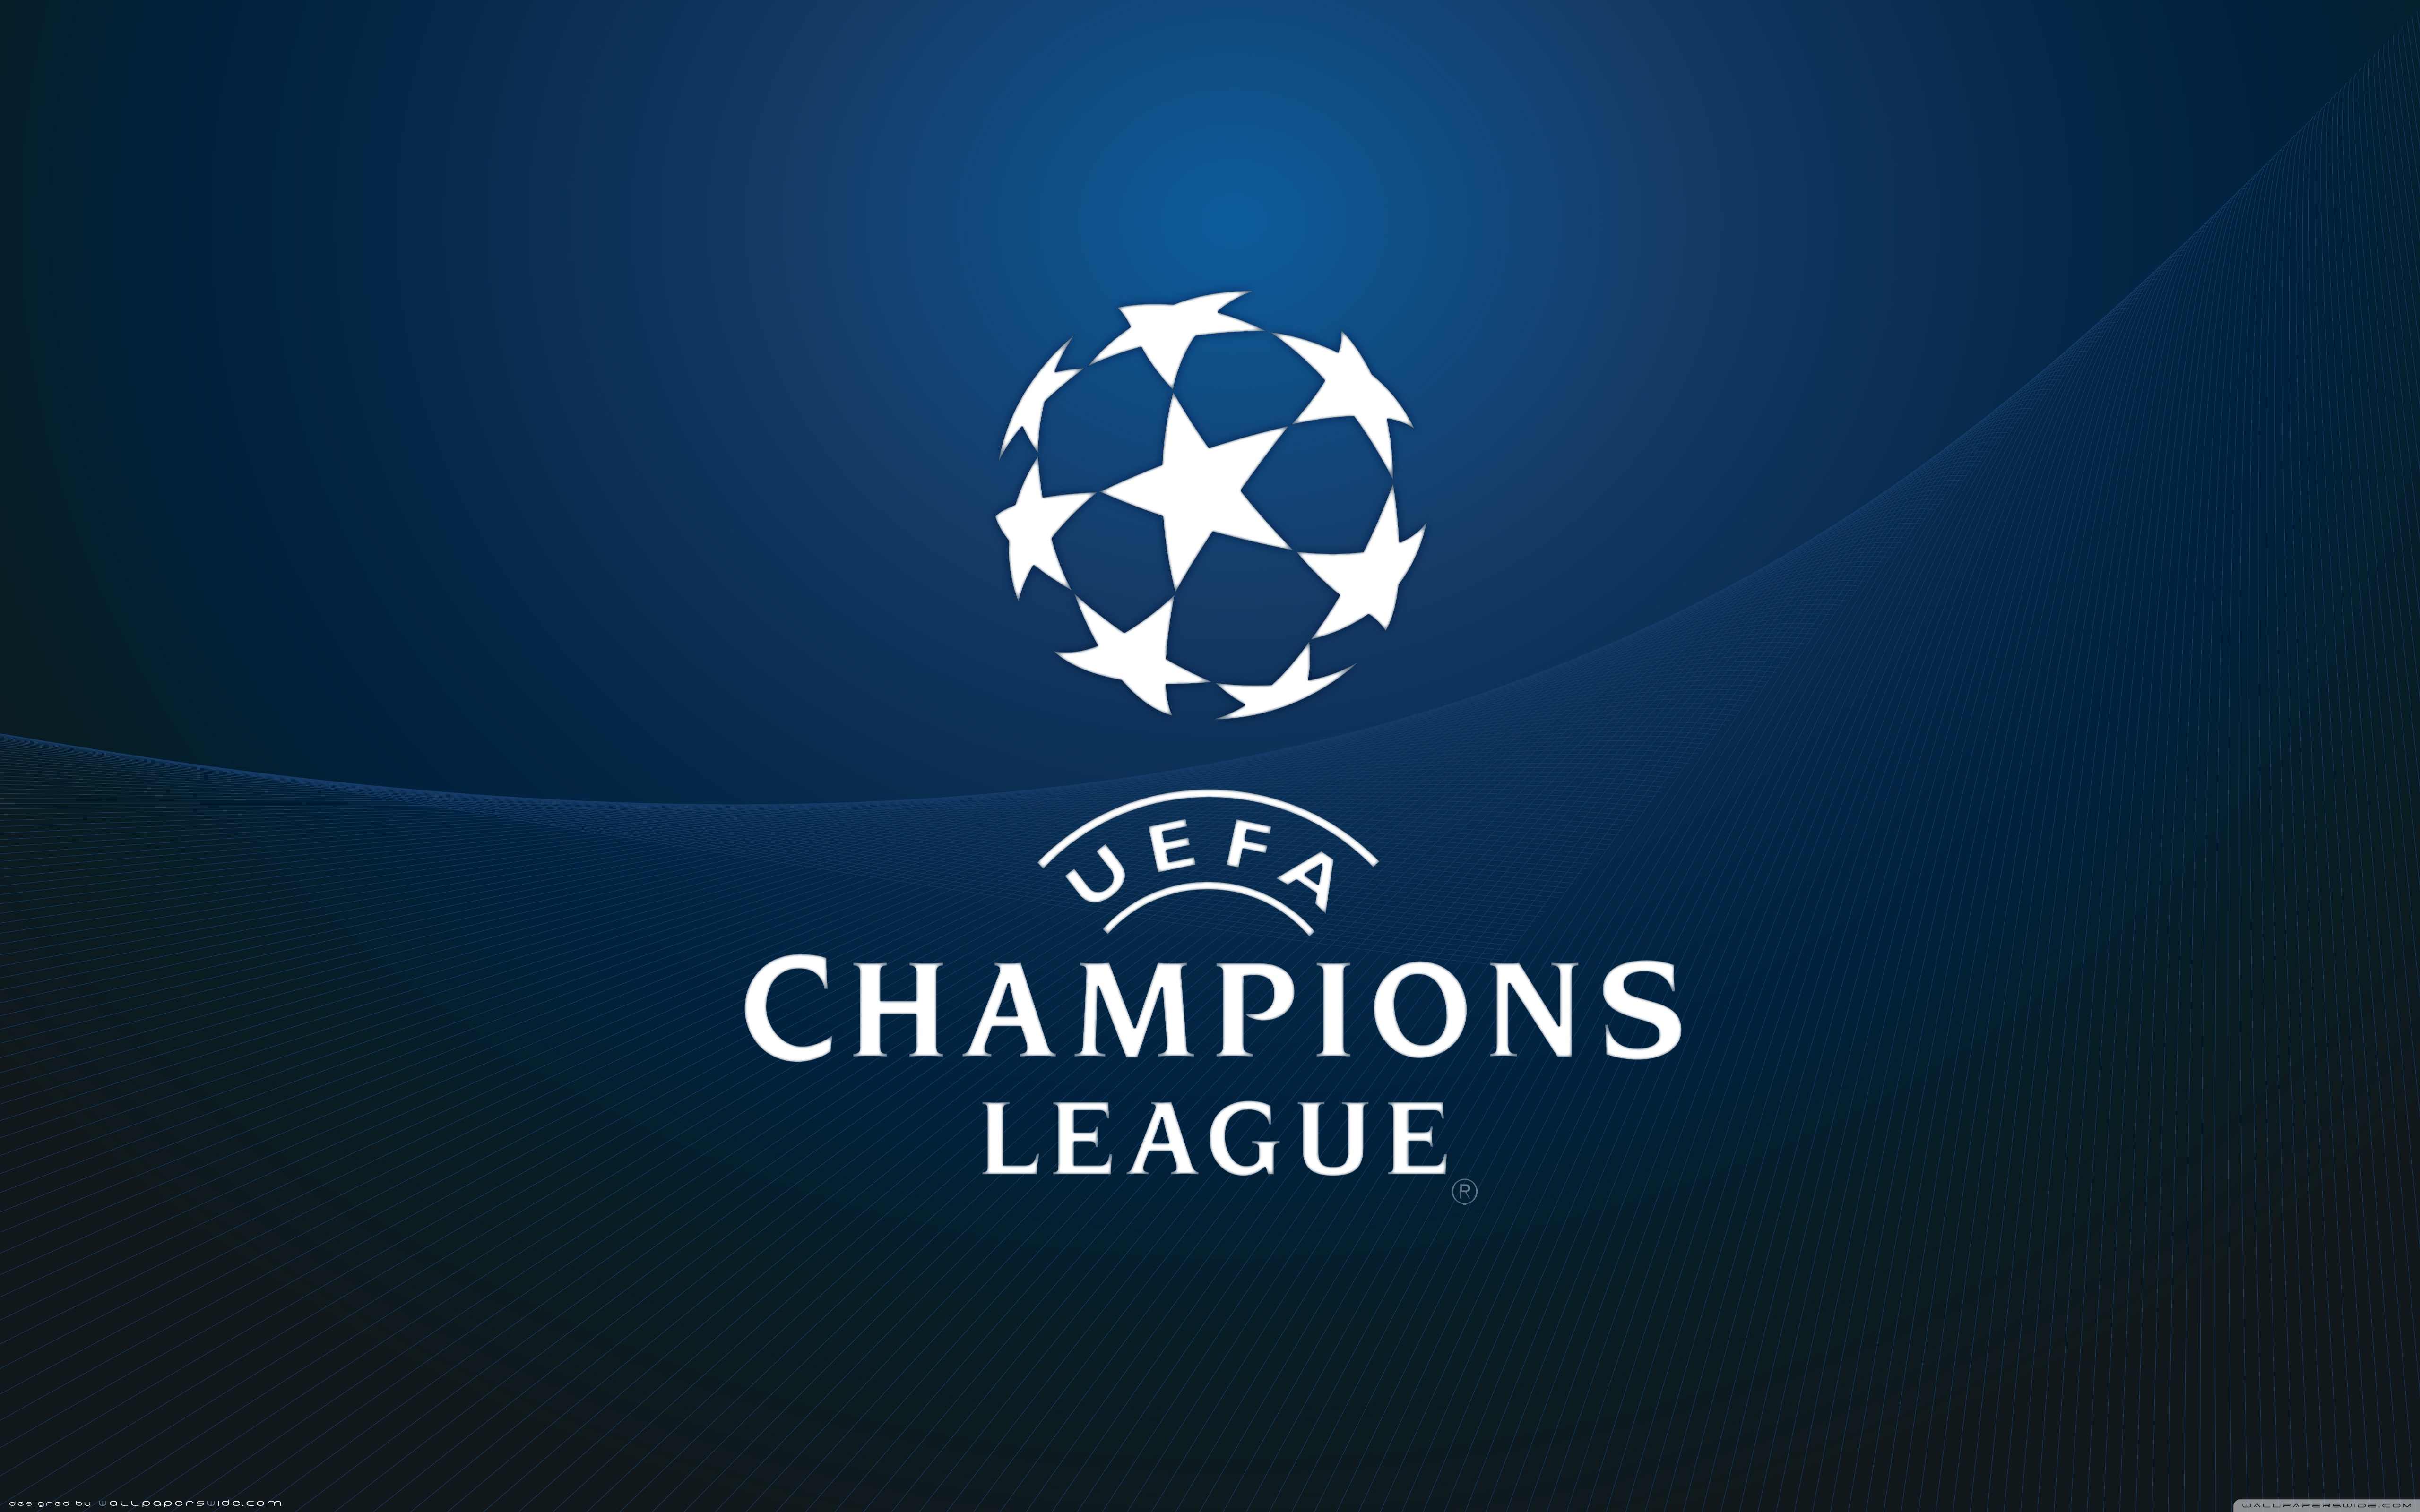 WallpaperWide.com. High Resolution Desktop Wallpaper tagged with uefa champions league